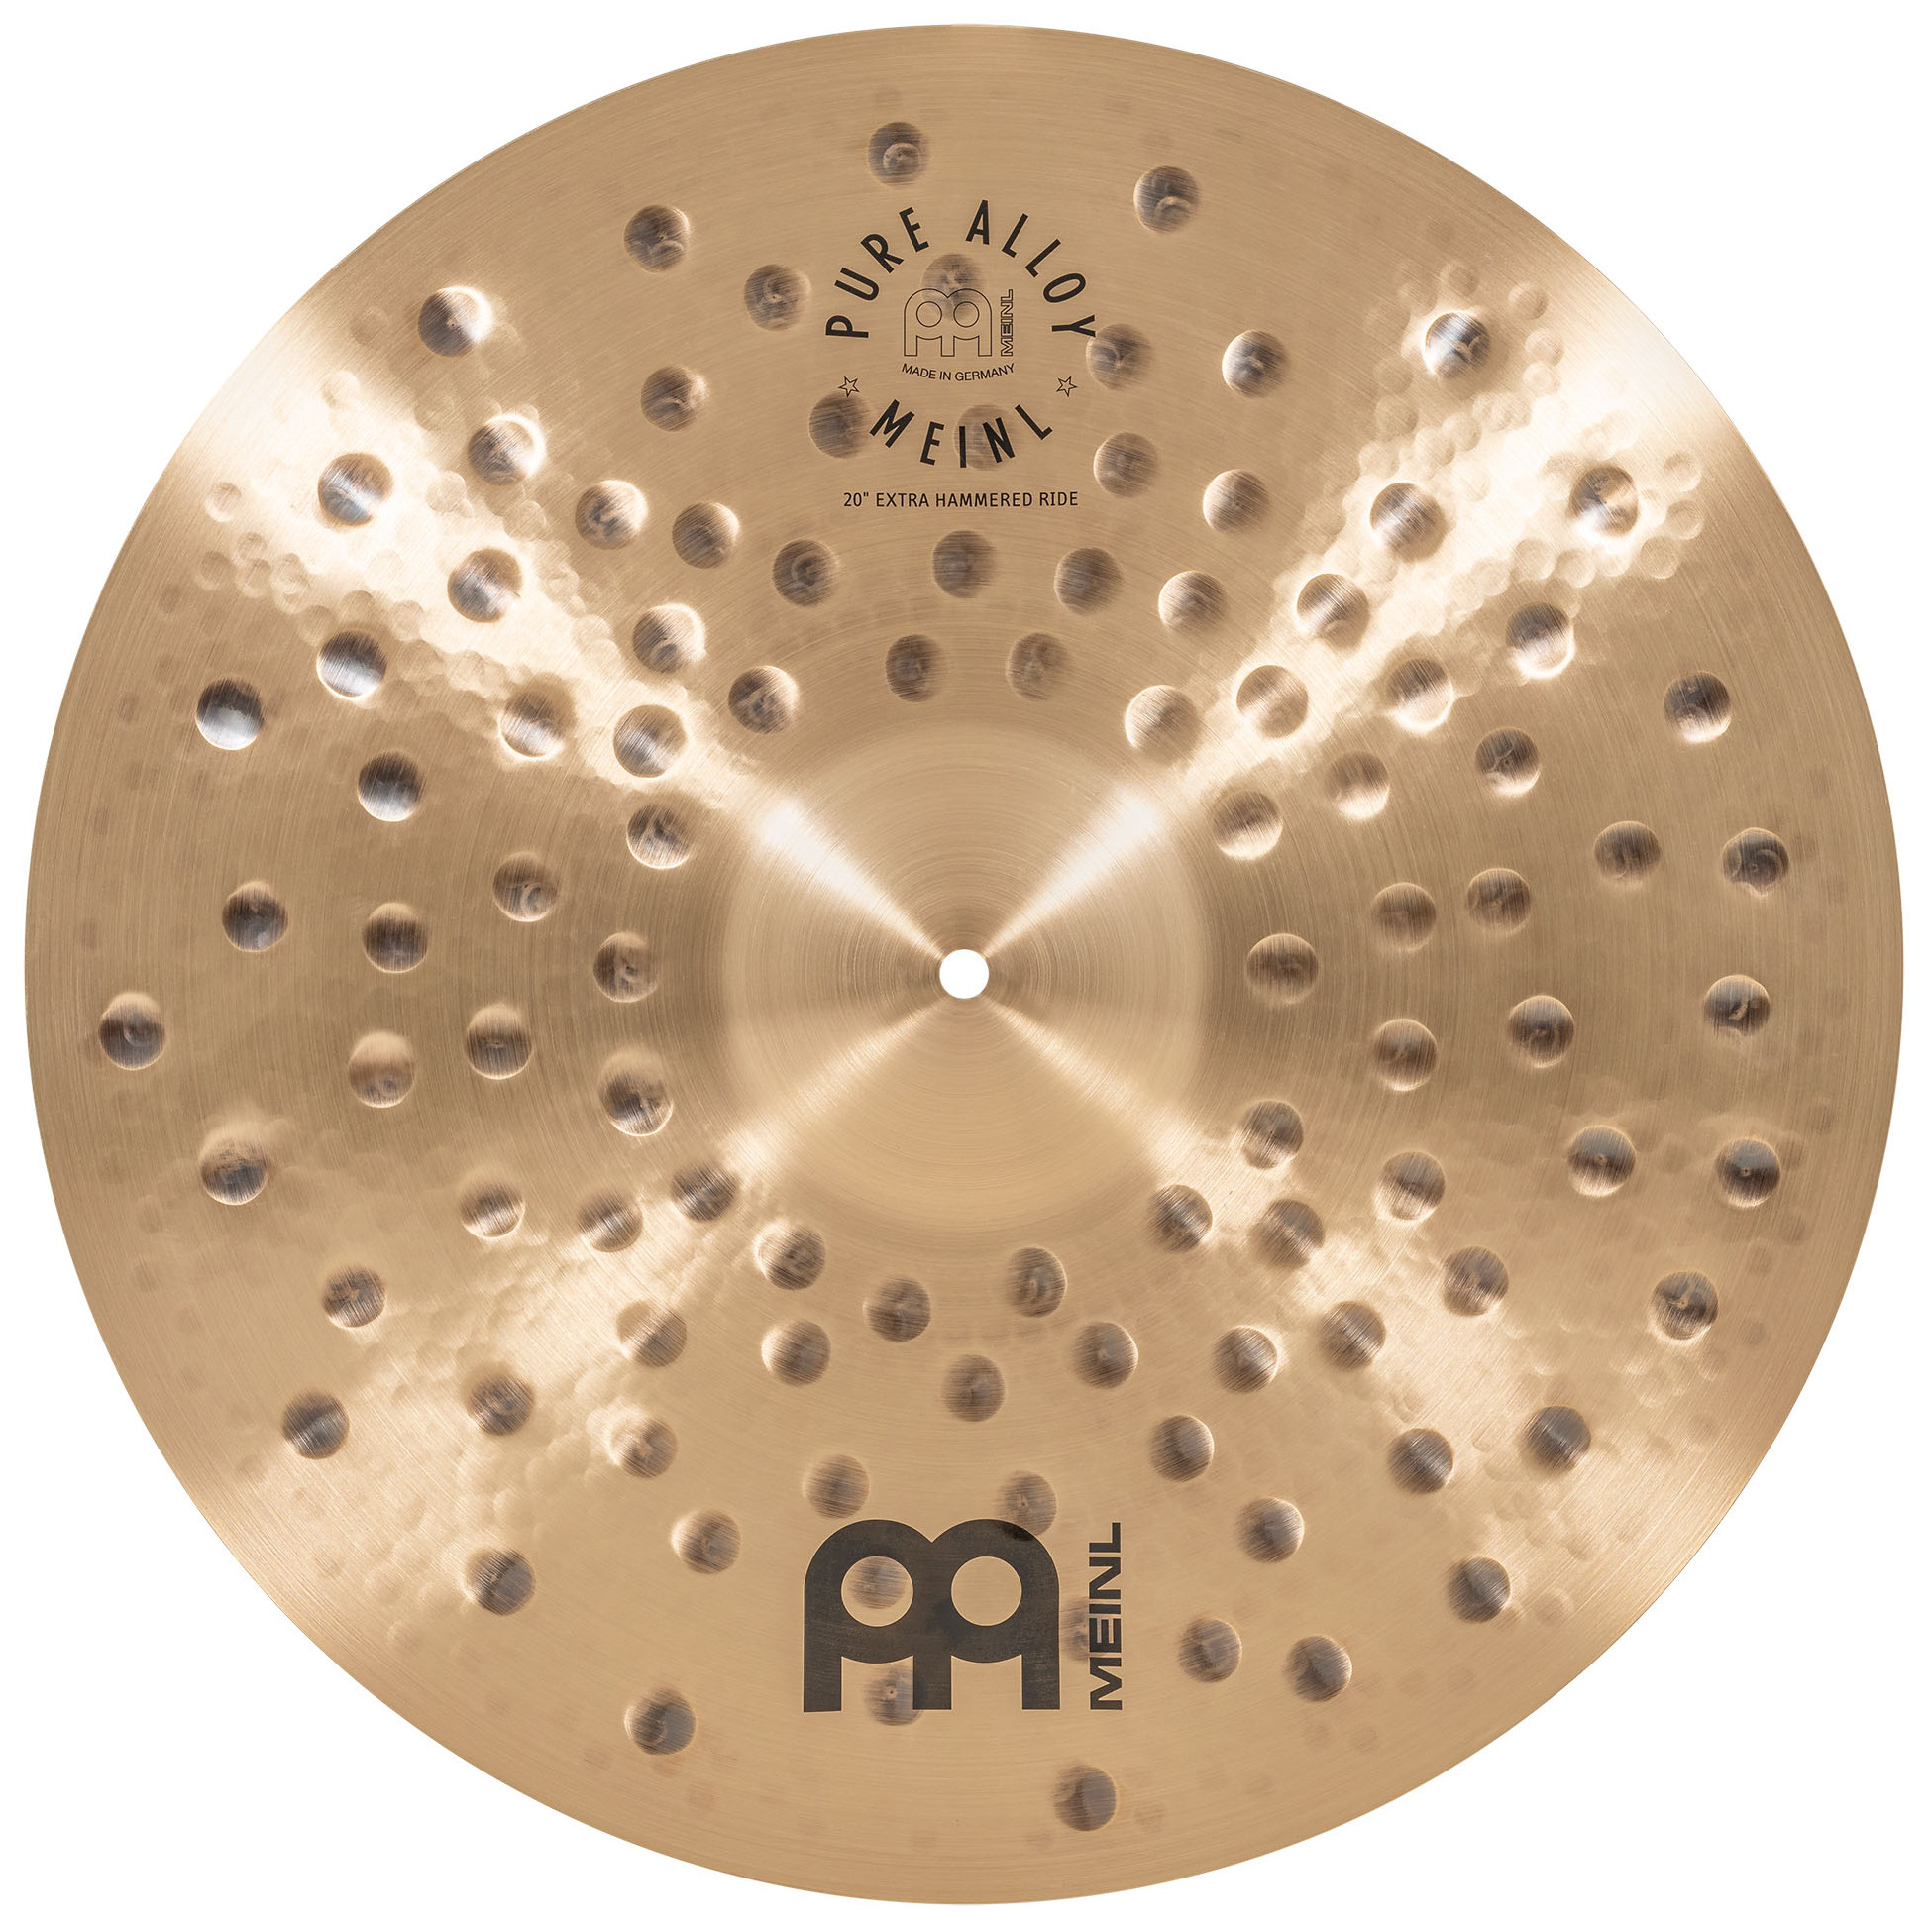 Meinl Cymbals PA20EHR - 20" Pure Alloy Extra Hammered Ride